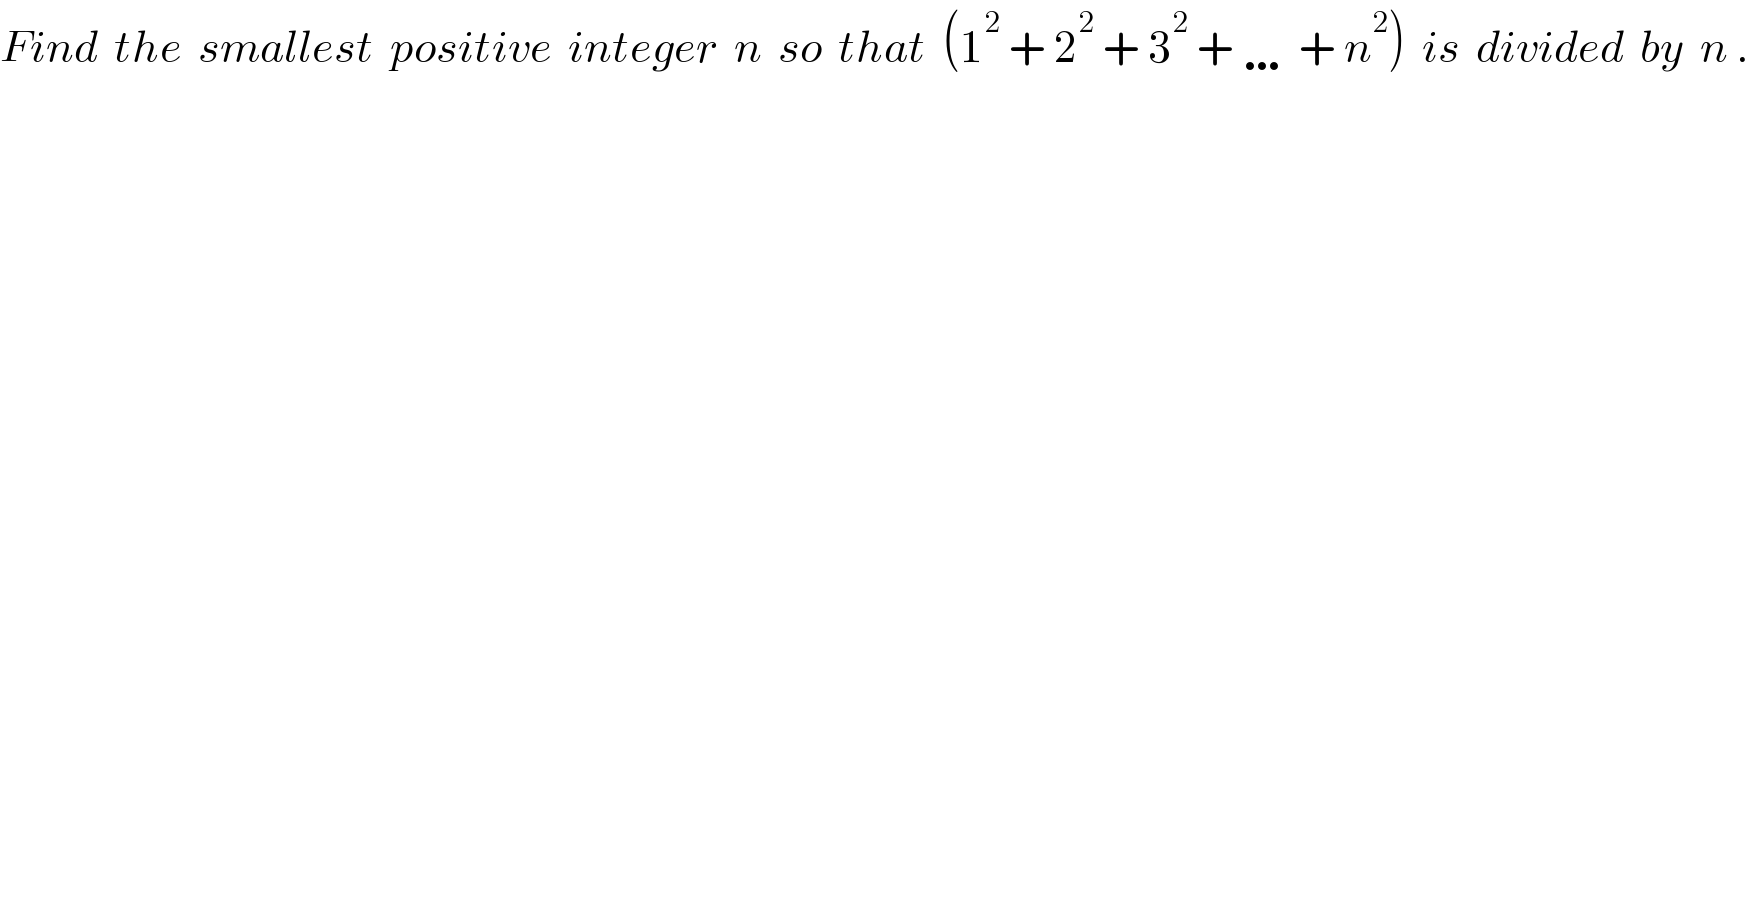 Find  the  smallest  positive  integer  n  so  that  (1^2  + 2^2  + 3^2  + … + n^2 )  is  divided  by  n .  